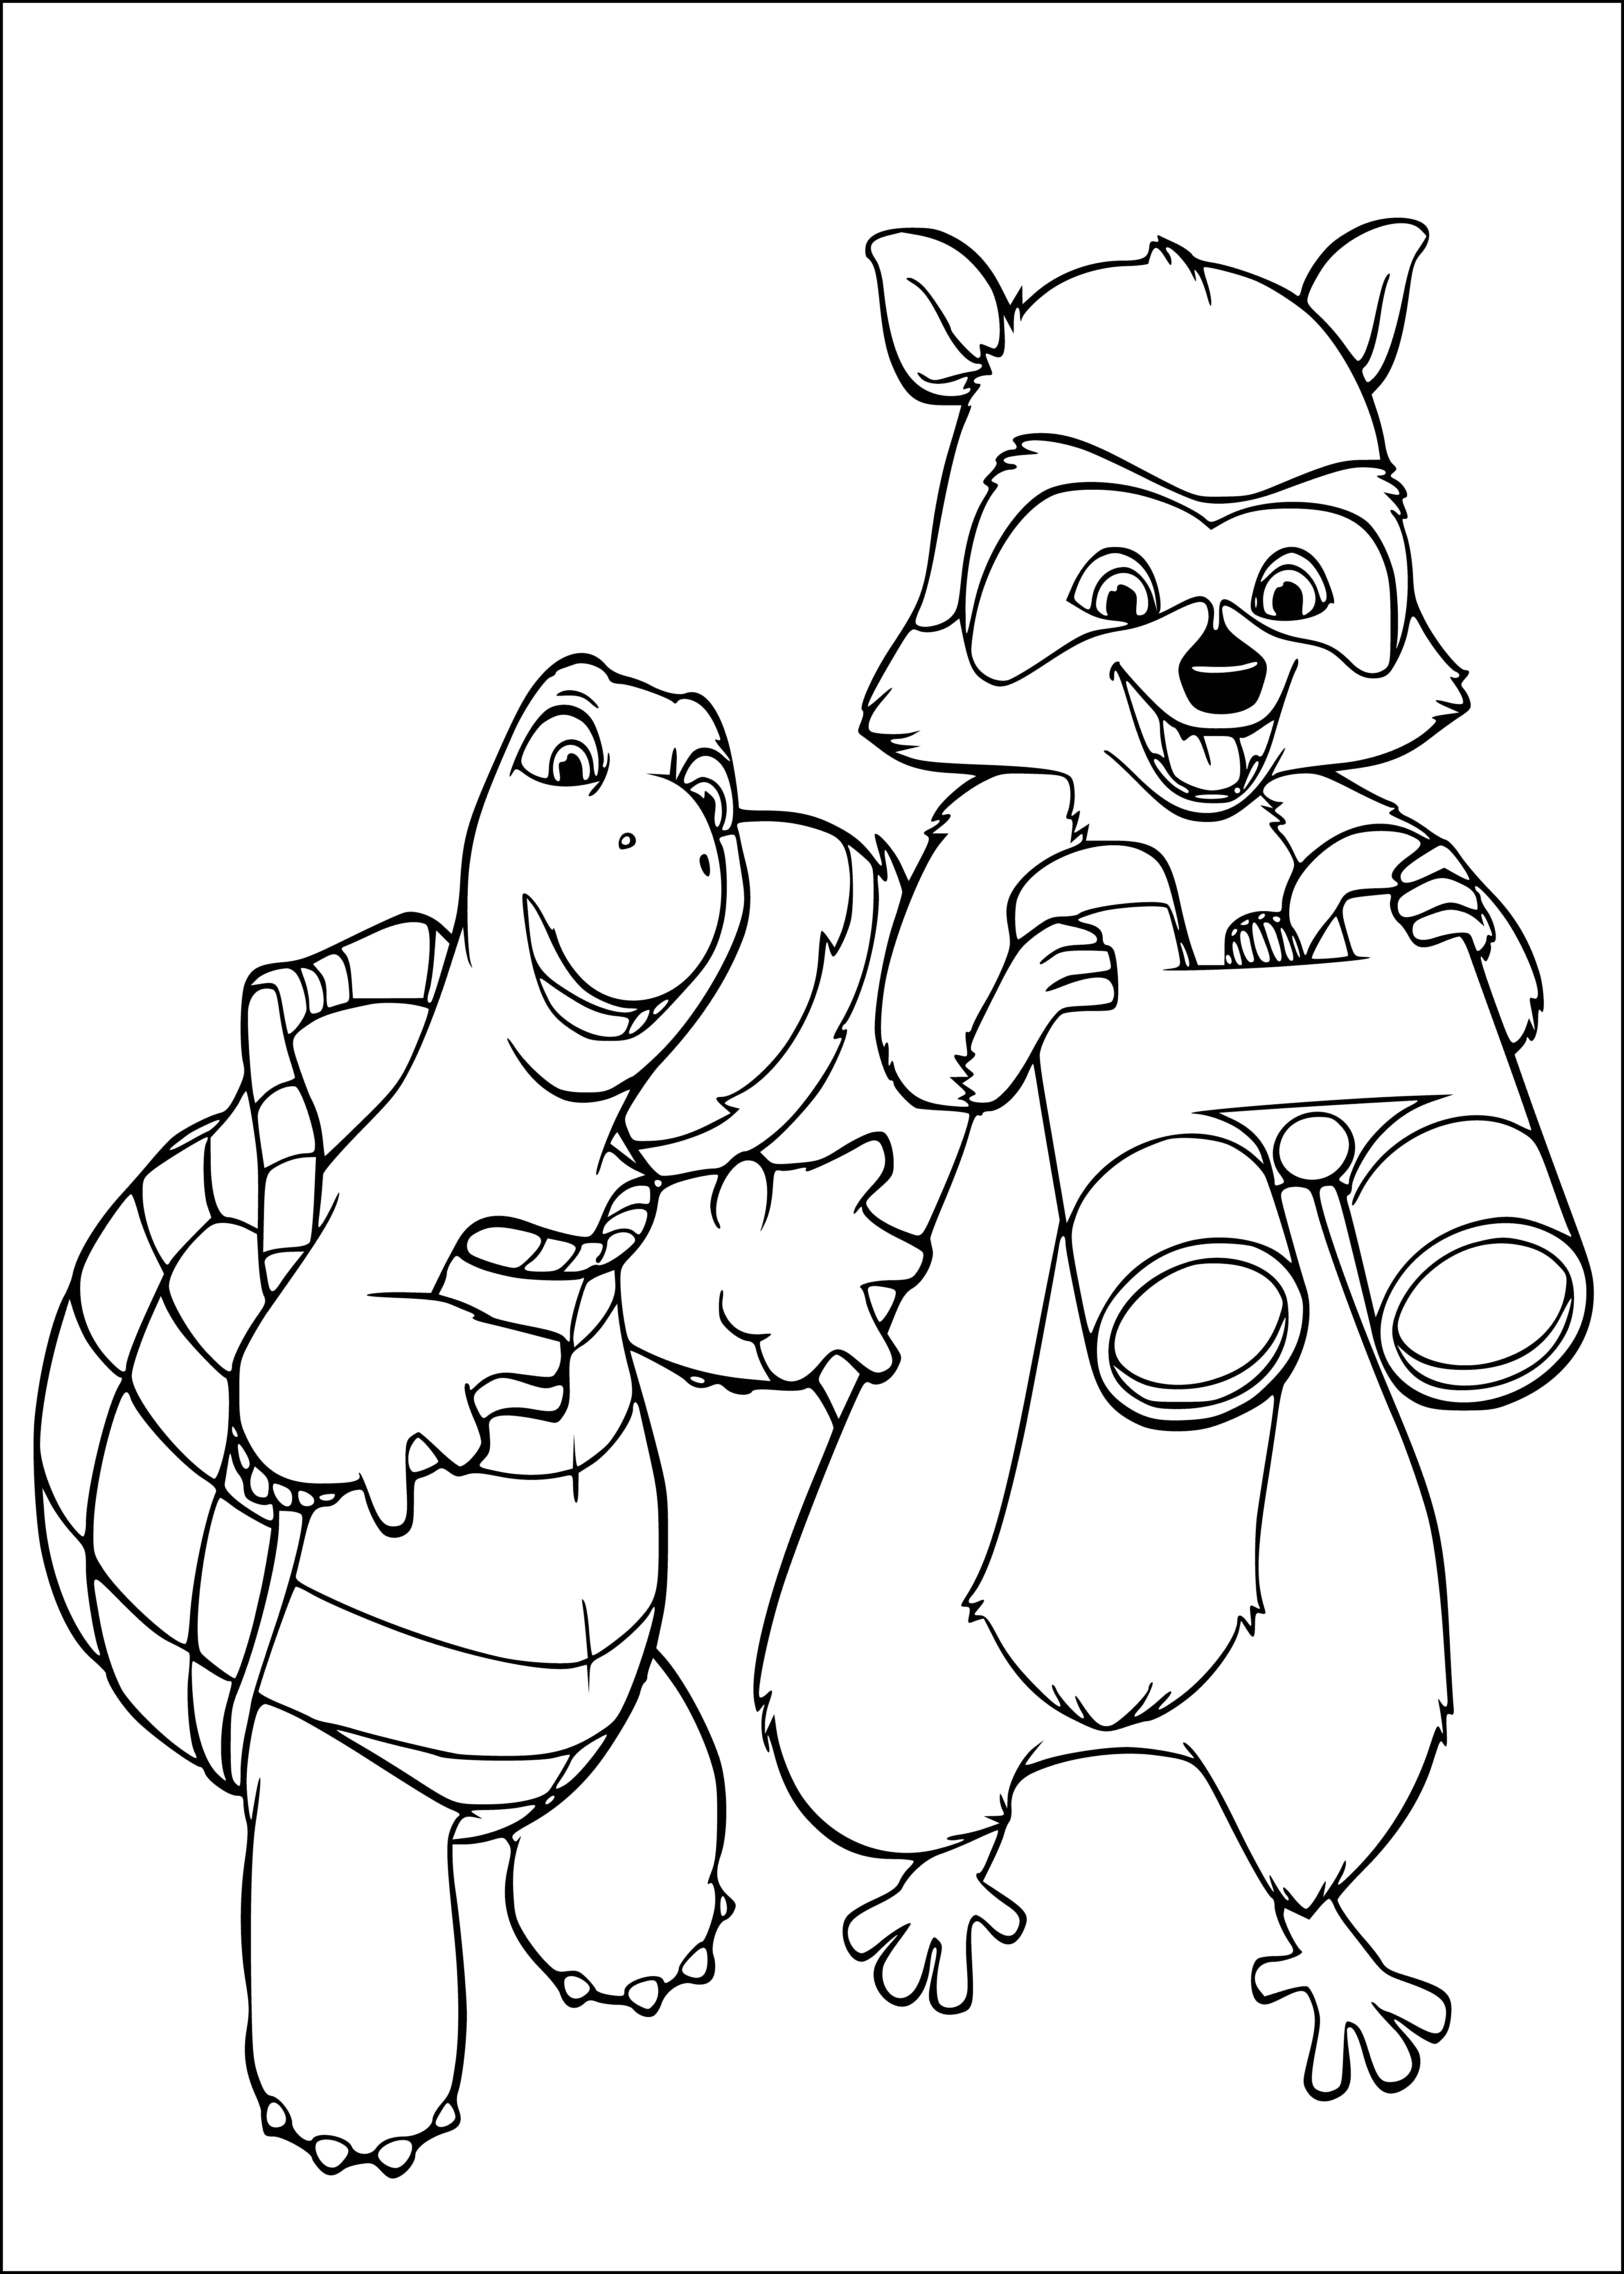 coloring page: A turtle and raccoon look at something together; turtle's shell is green, raccoon's body is brown, bushy tail in tow!